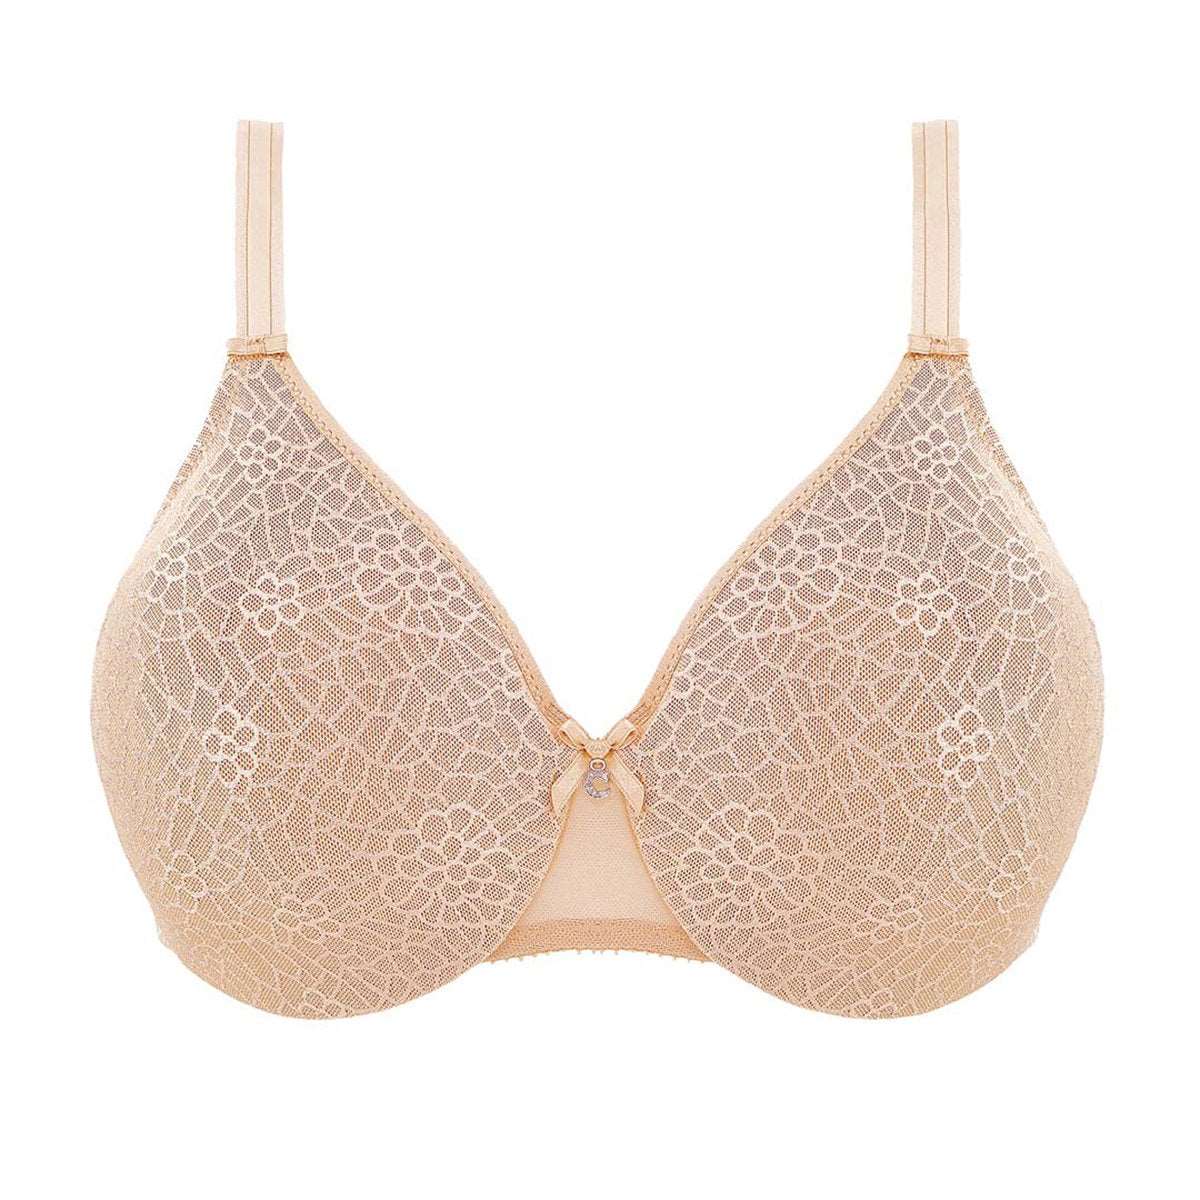 Chantelle bra 1891 C Magnaifique Full Cup Bra in nude beige how should a bra fit french lingerie canada toronto linea intima